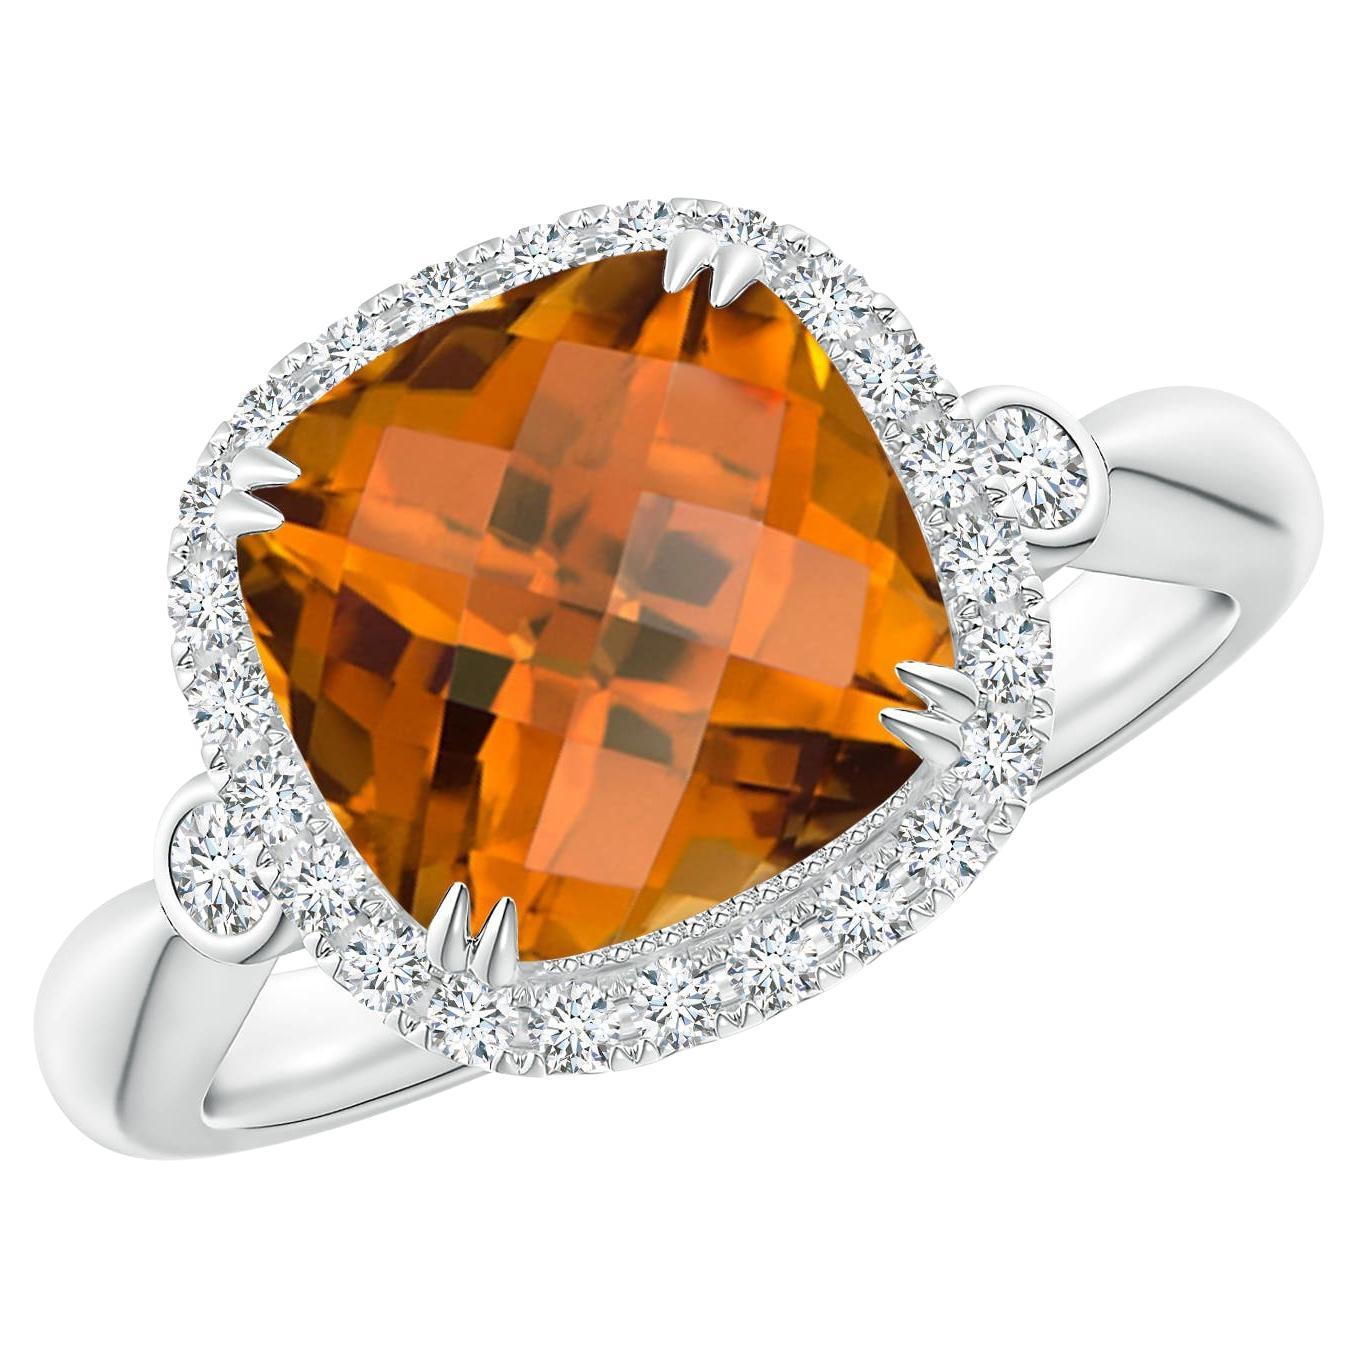 For Sale:  ANGARA GIA Certified Natural Cushion Orange Zircon Ring in White Gold